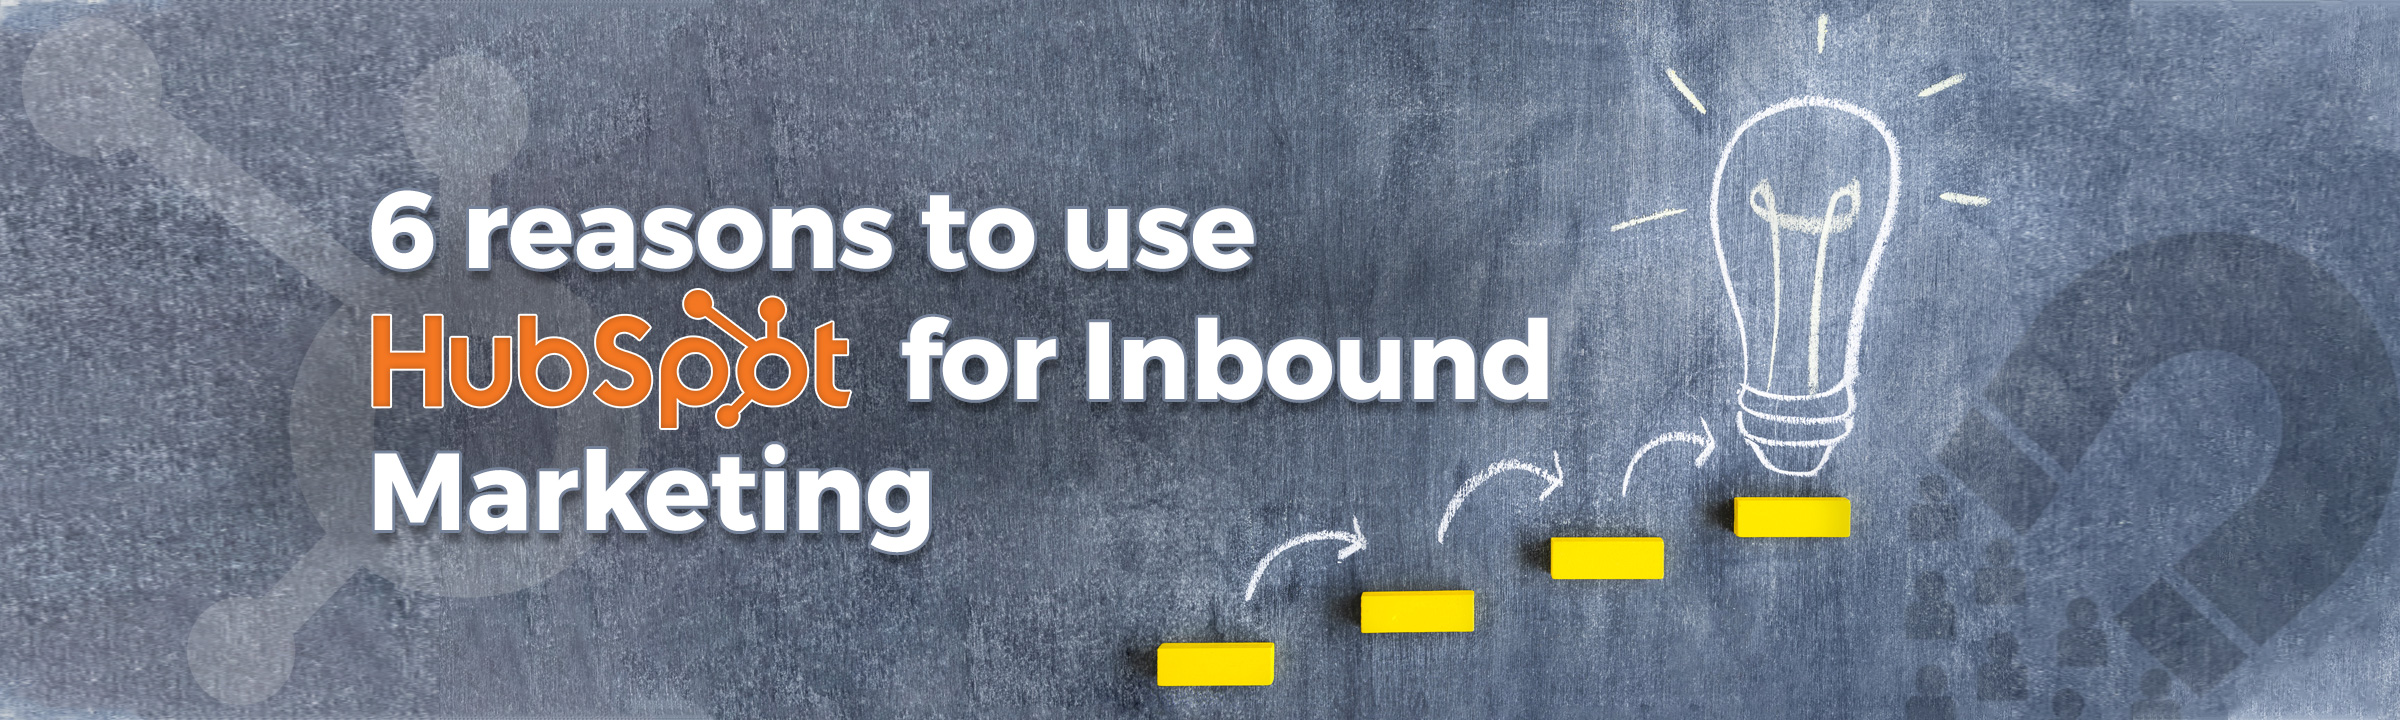 6 Reasons to use Hubspot for Inbound Marketing